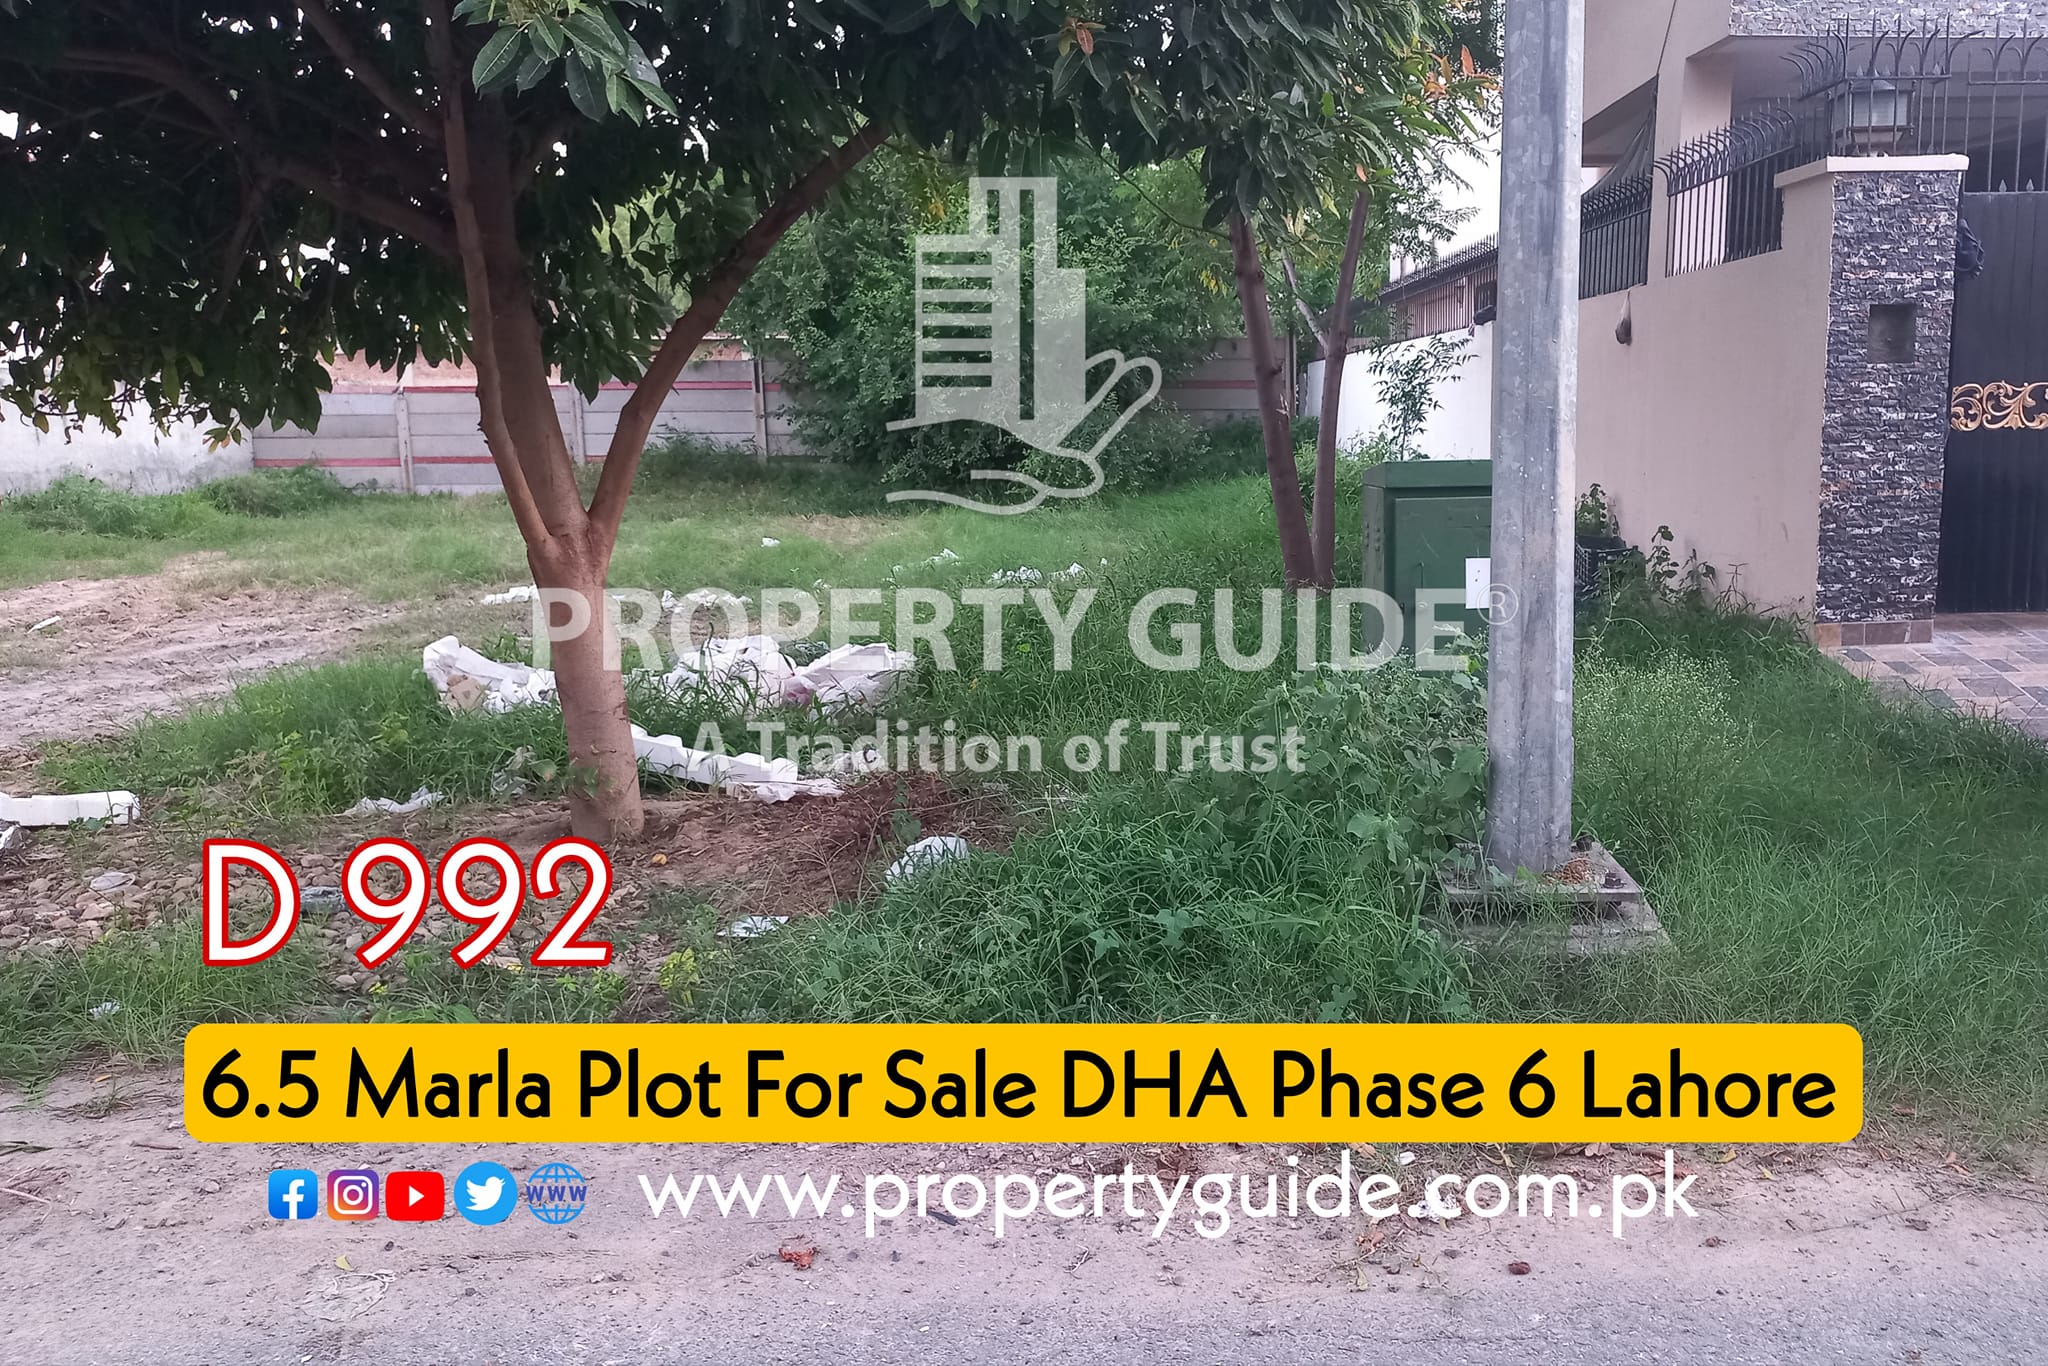 6.5 Marla Plot For Sale DHA Phase 6 Lahore – Property Guide